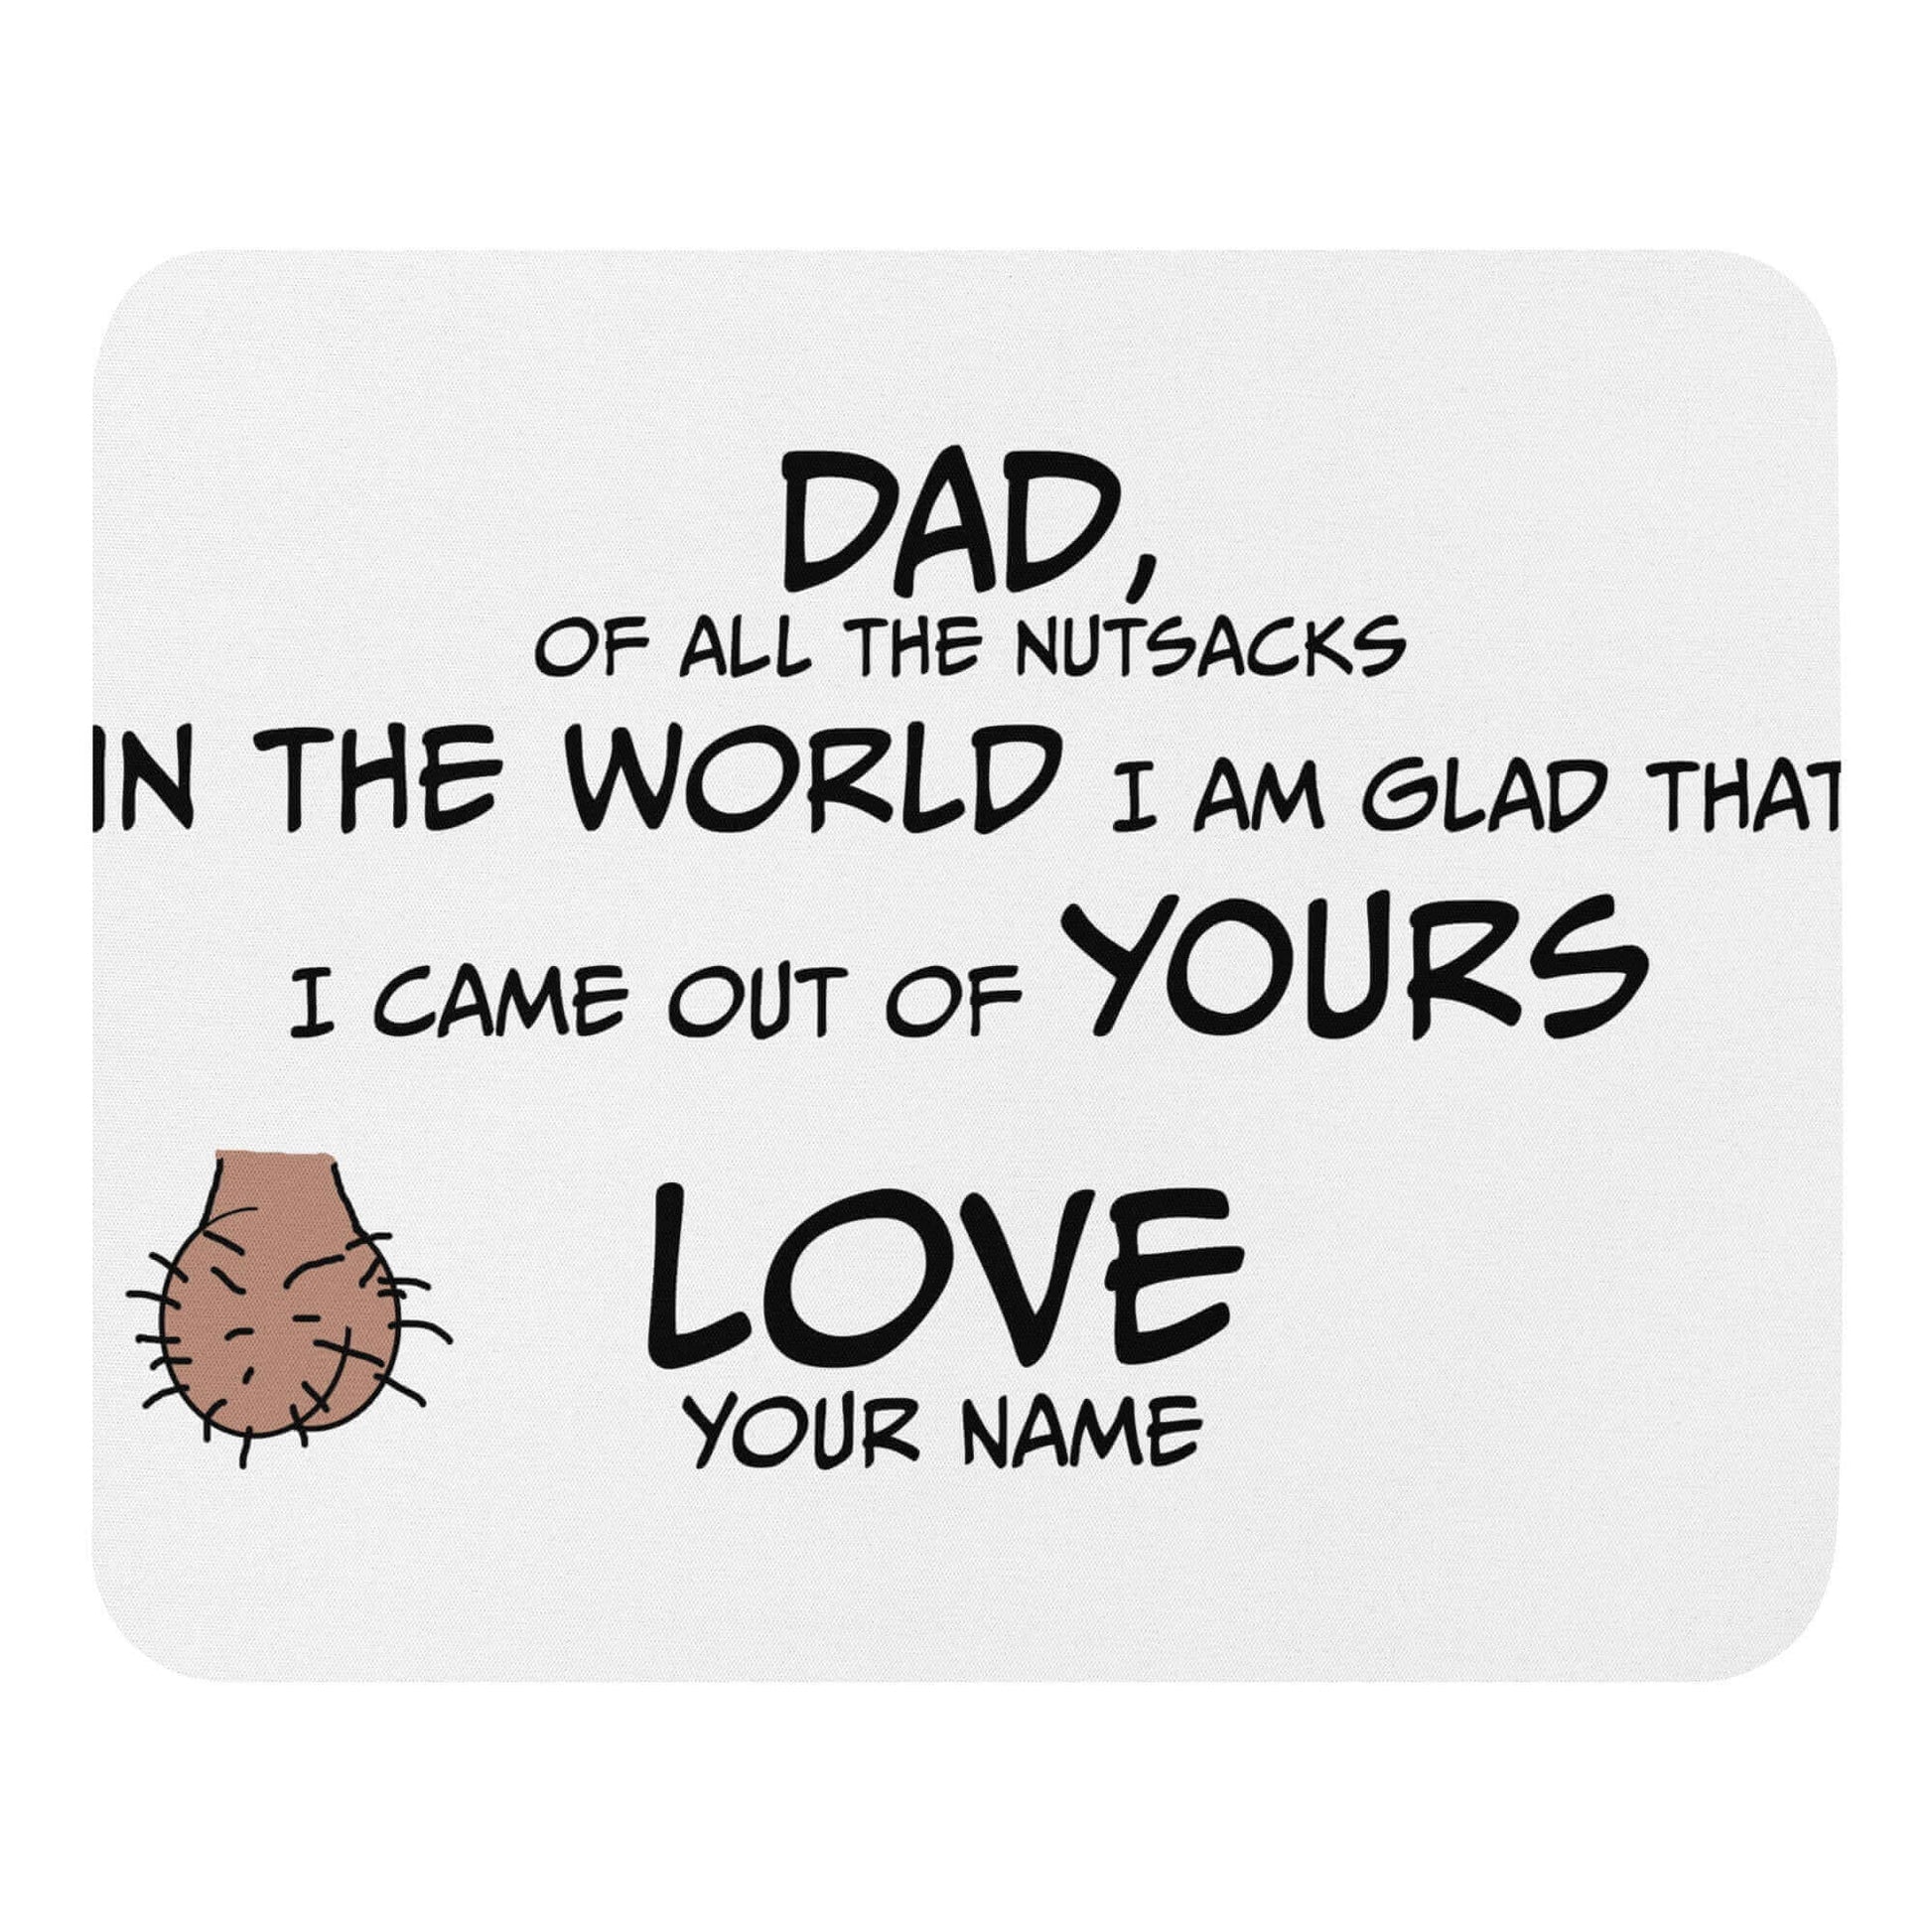 Dad, of all the nutsacks in the world, I am glad that I came out of yours - Mouse pad - Horrible Designs